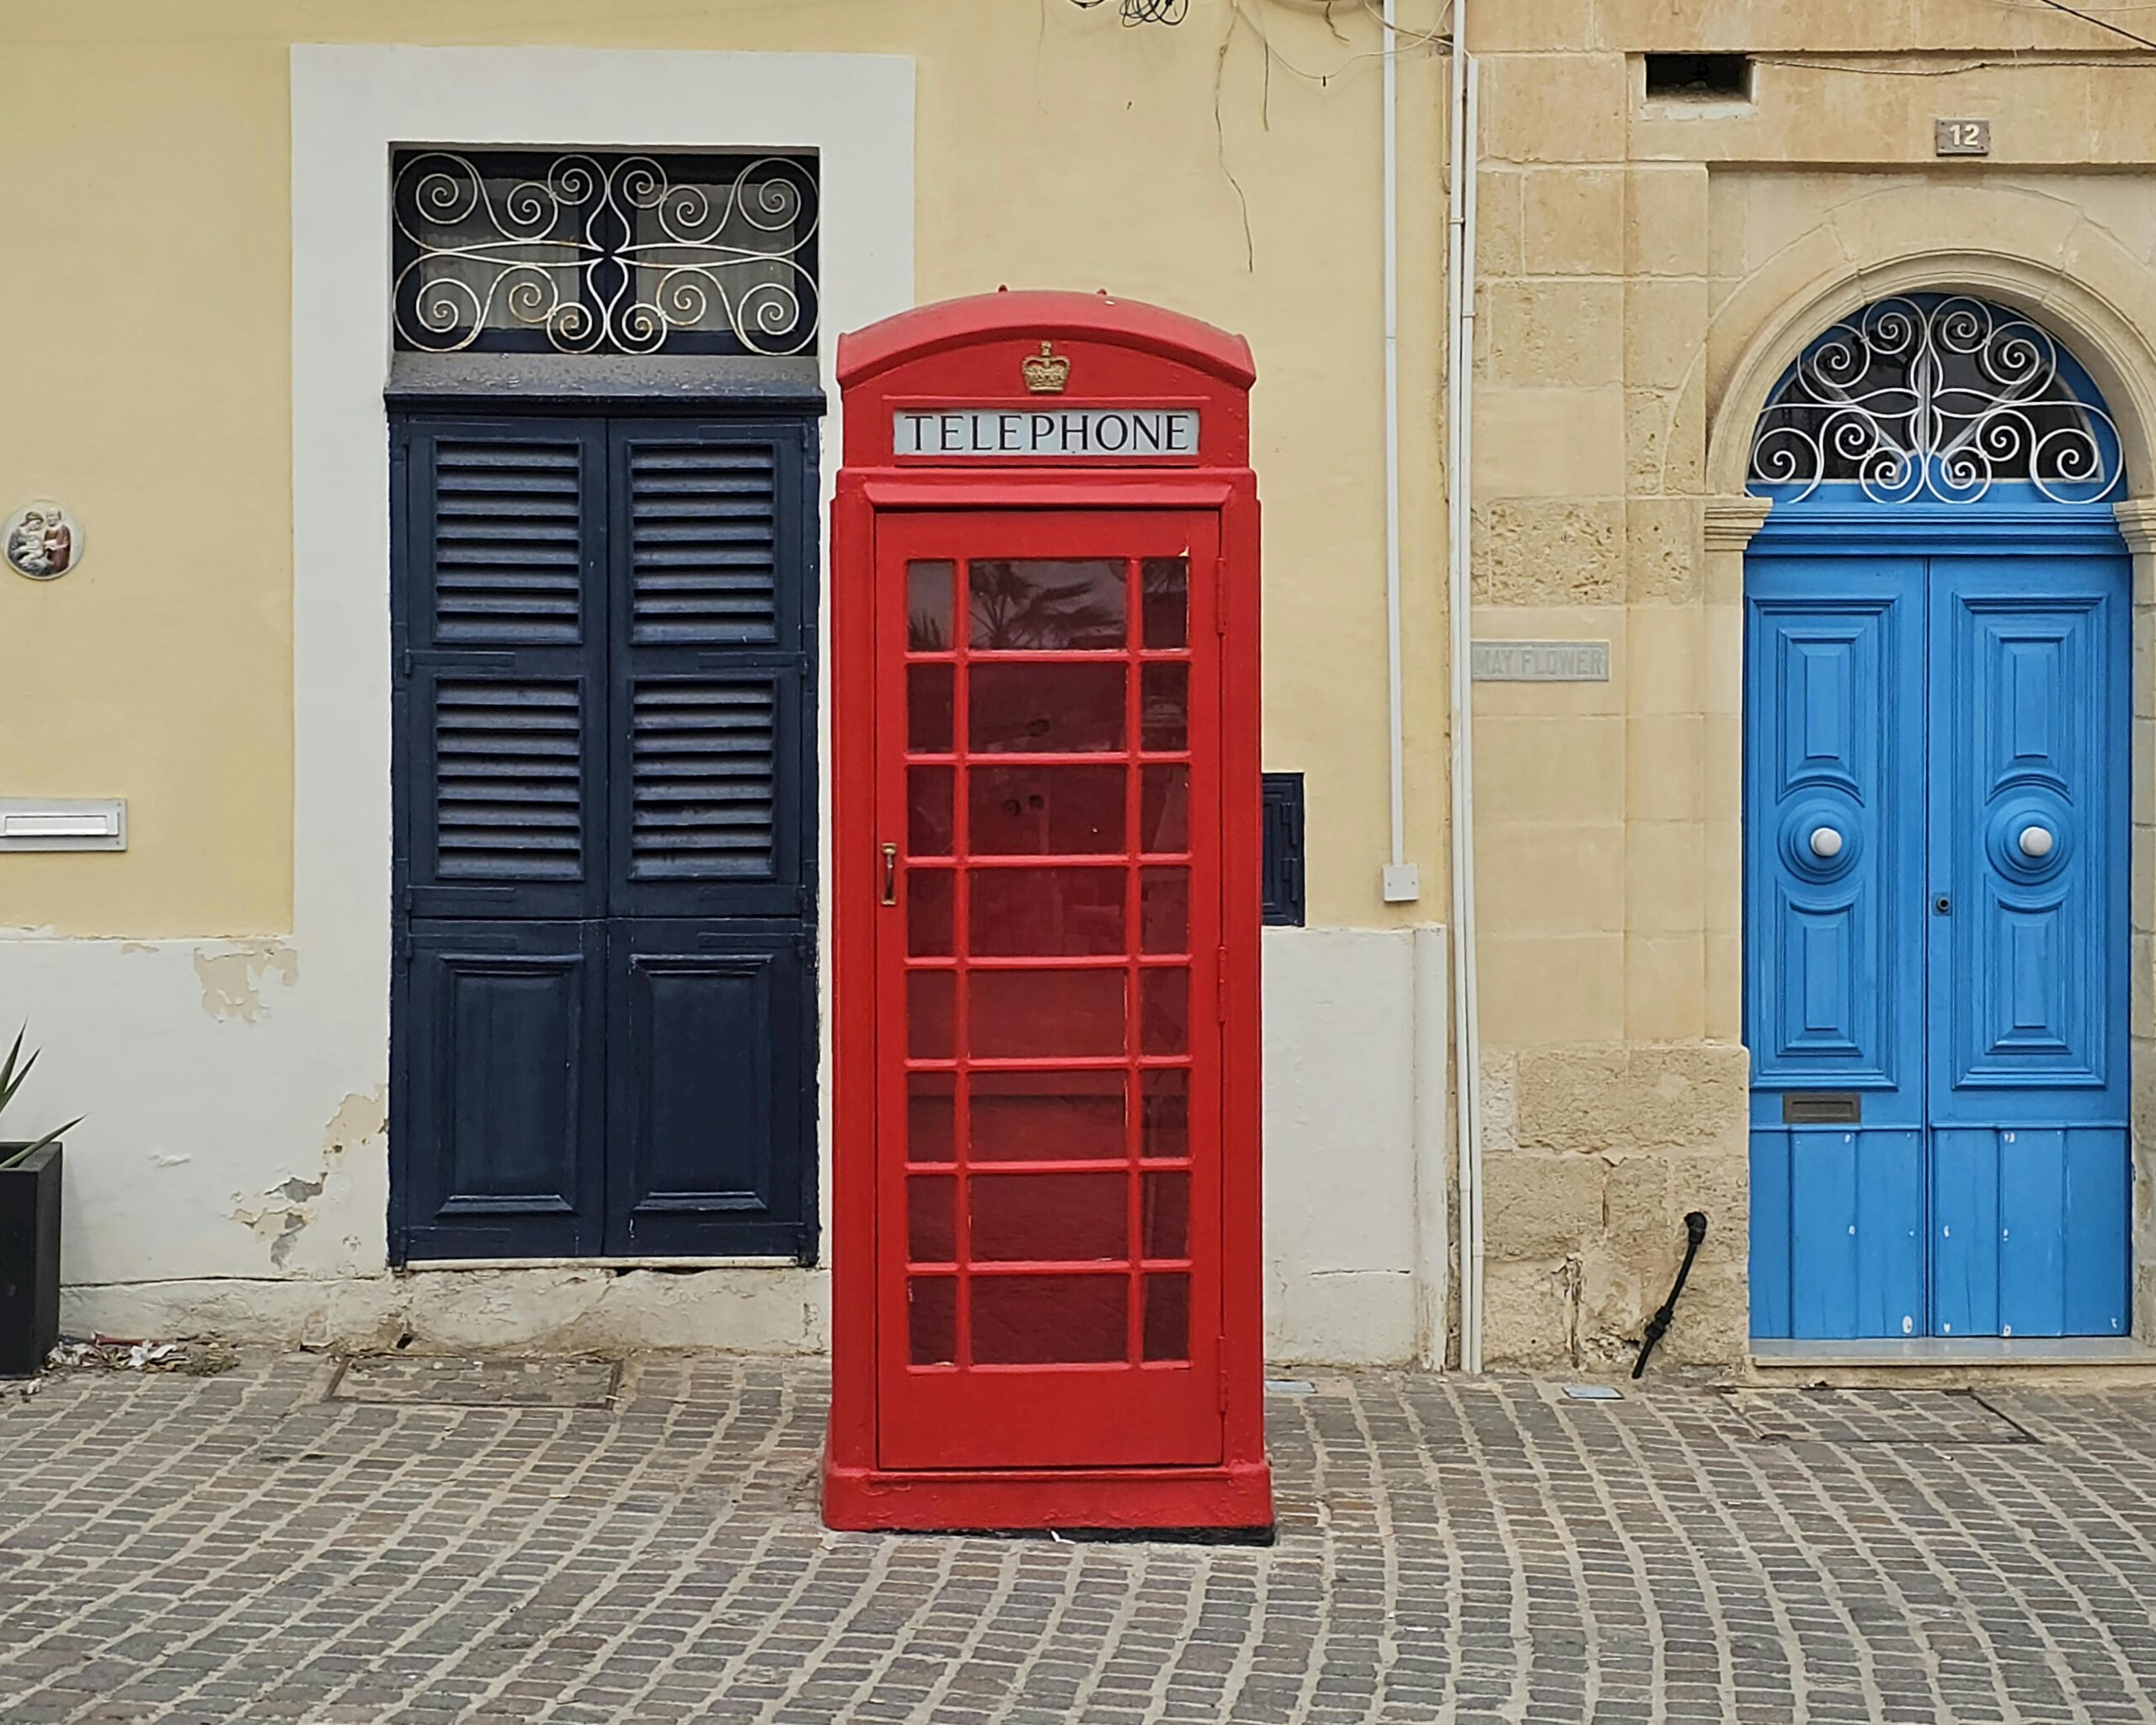 This is a red English telephone box but it is located in a Malta street.